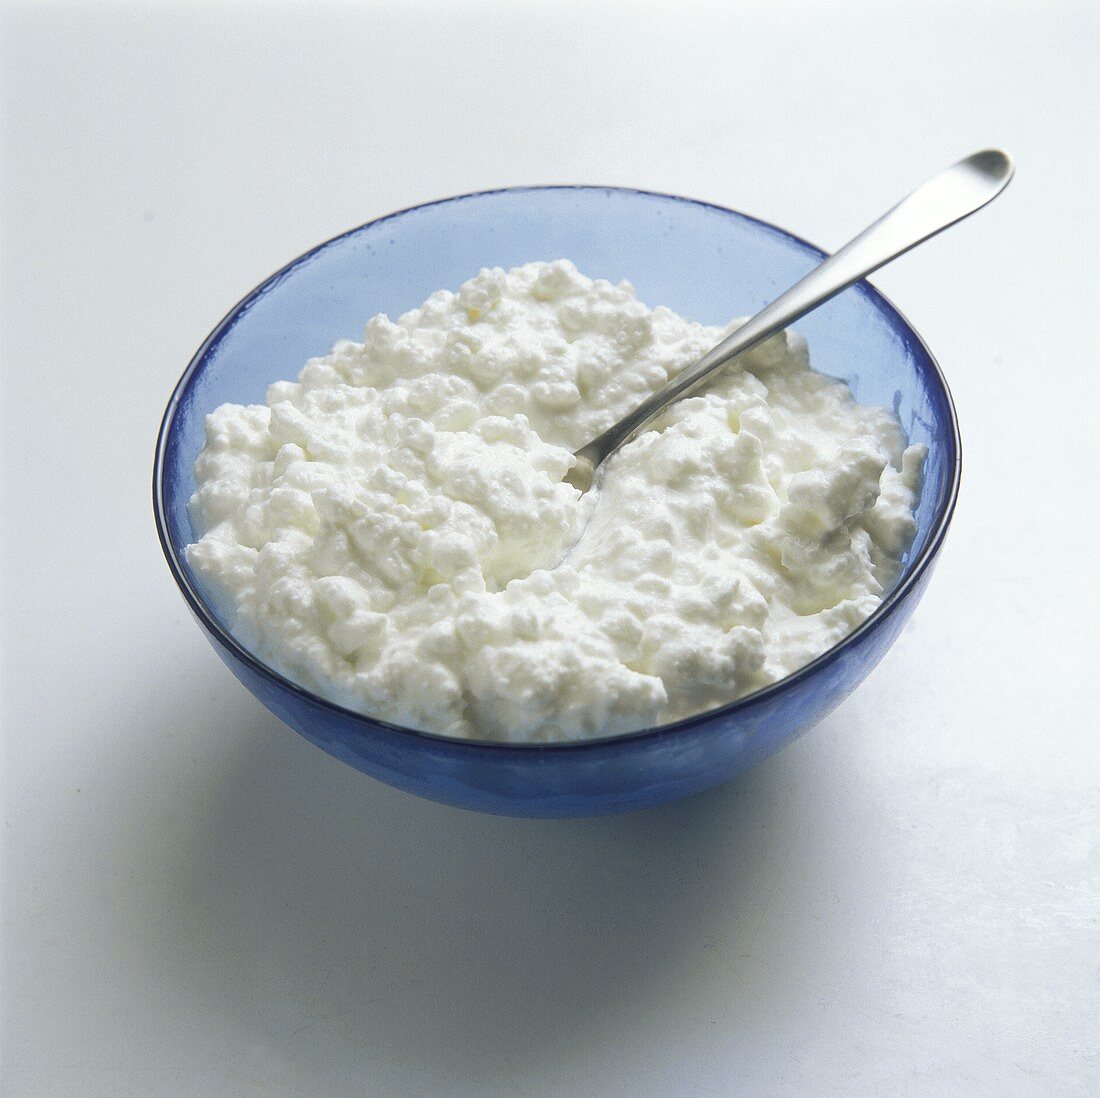 Cottage cheese in a blue bowl with spoon